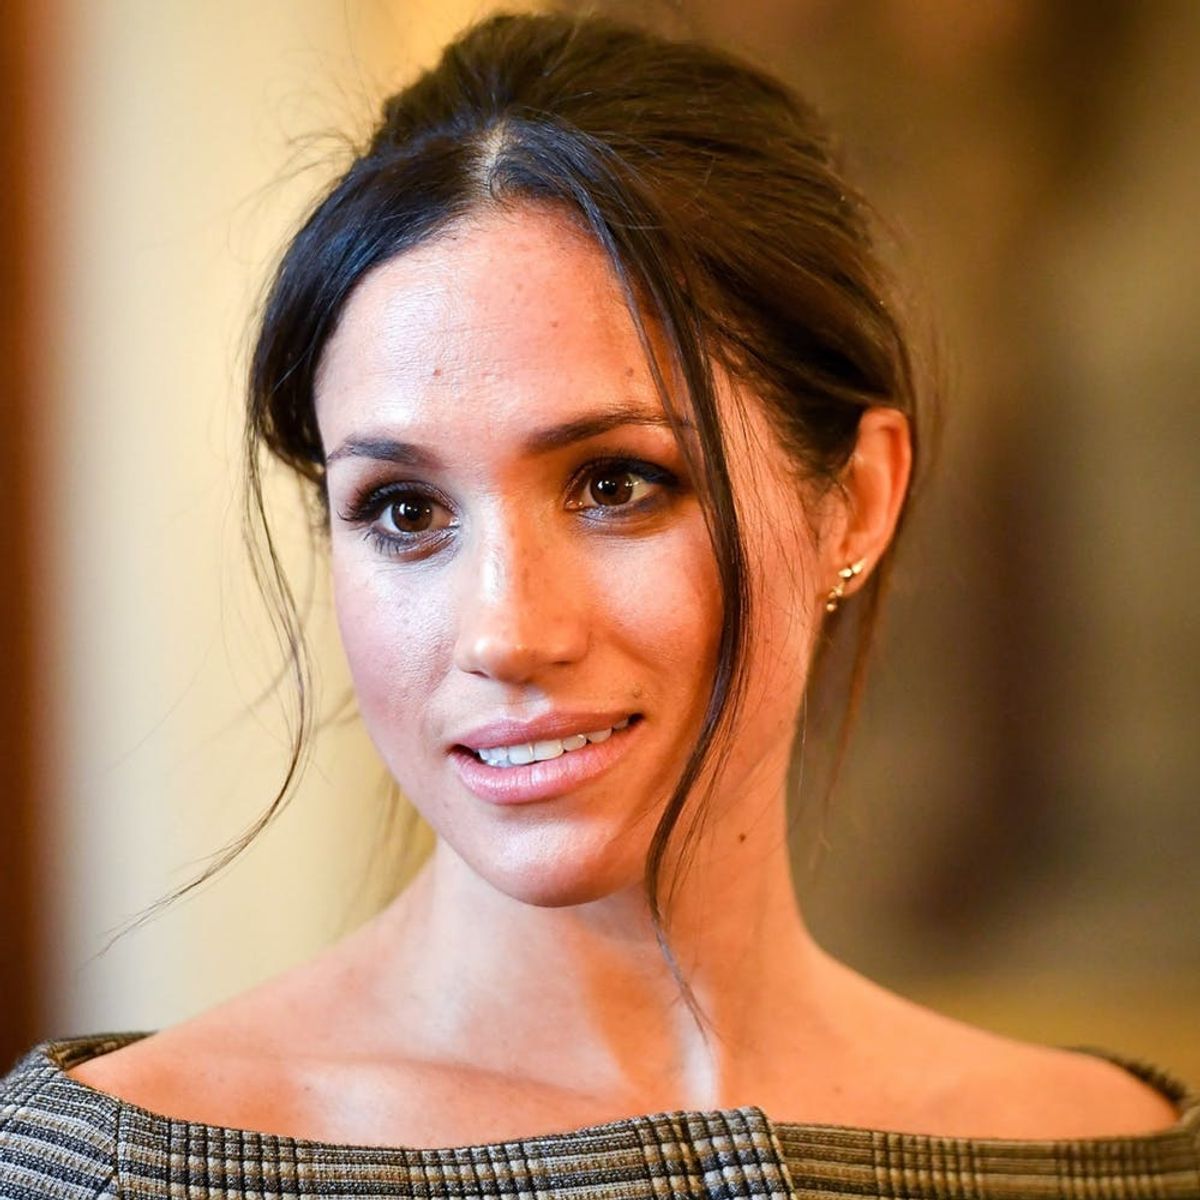 Kensington Palace Requests ‘Understanding and Respect’ for Meghan Markle’s Father Thomas Markle